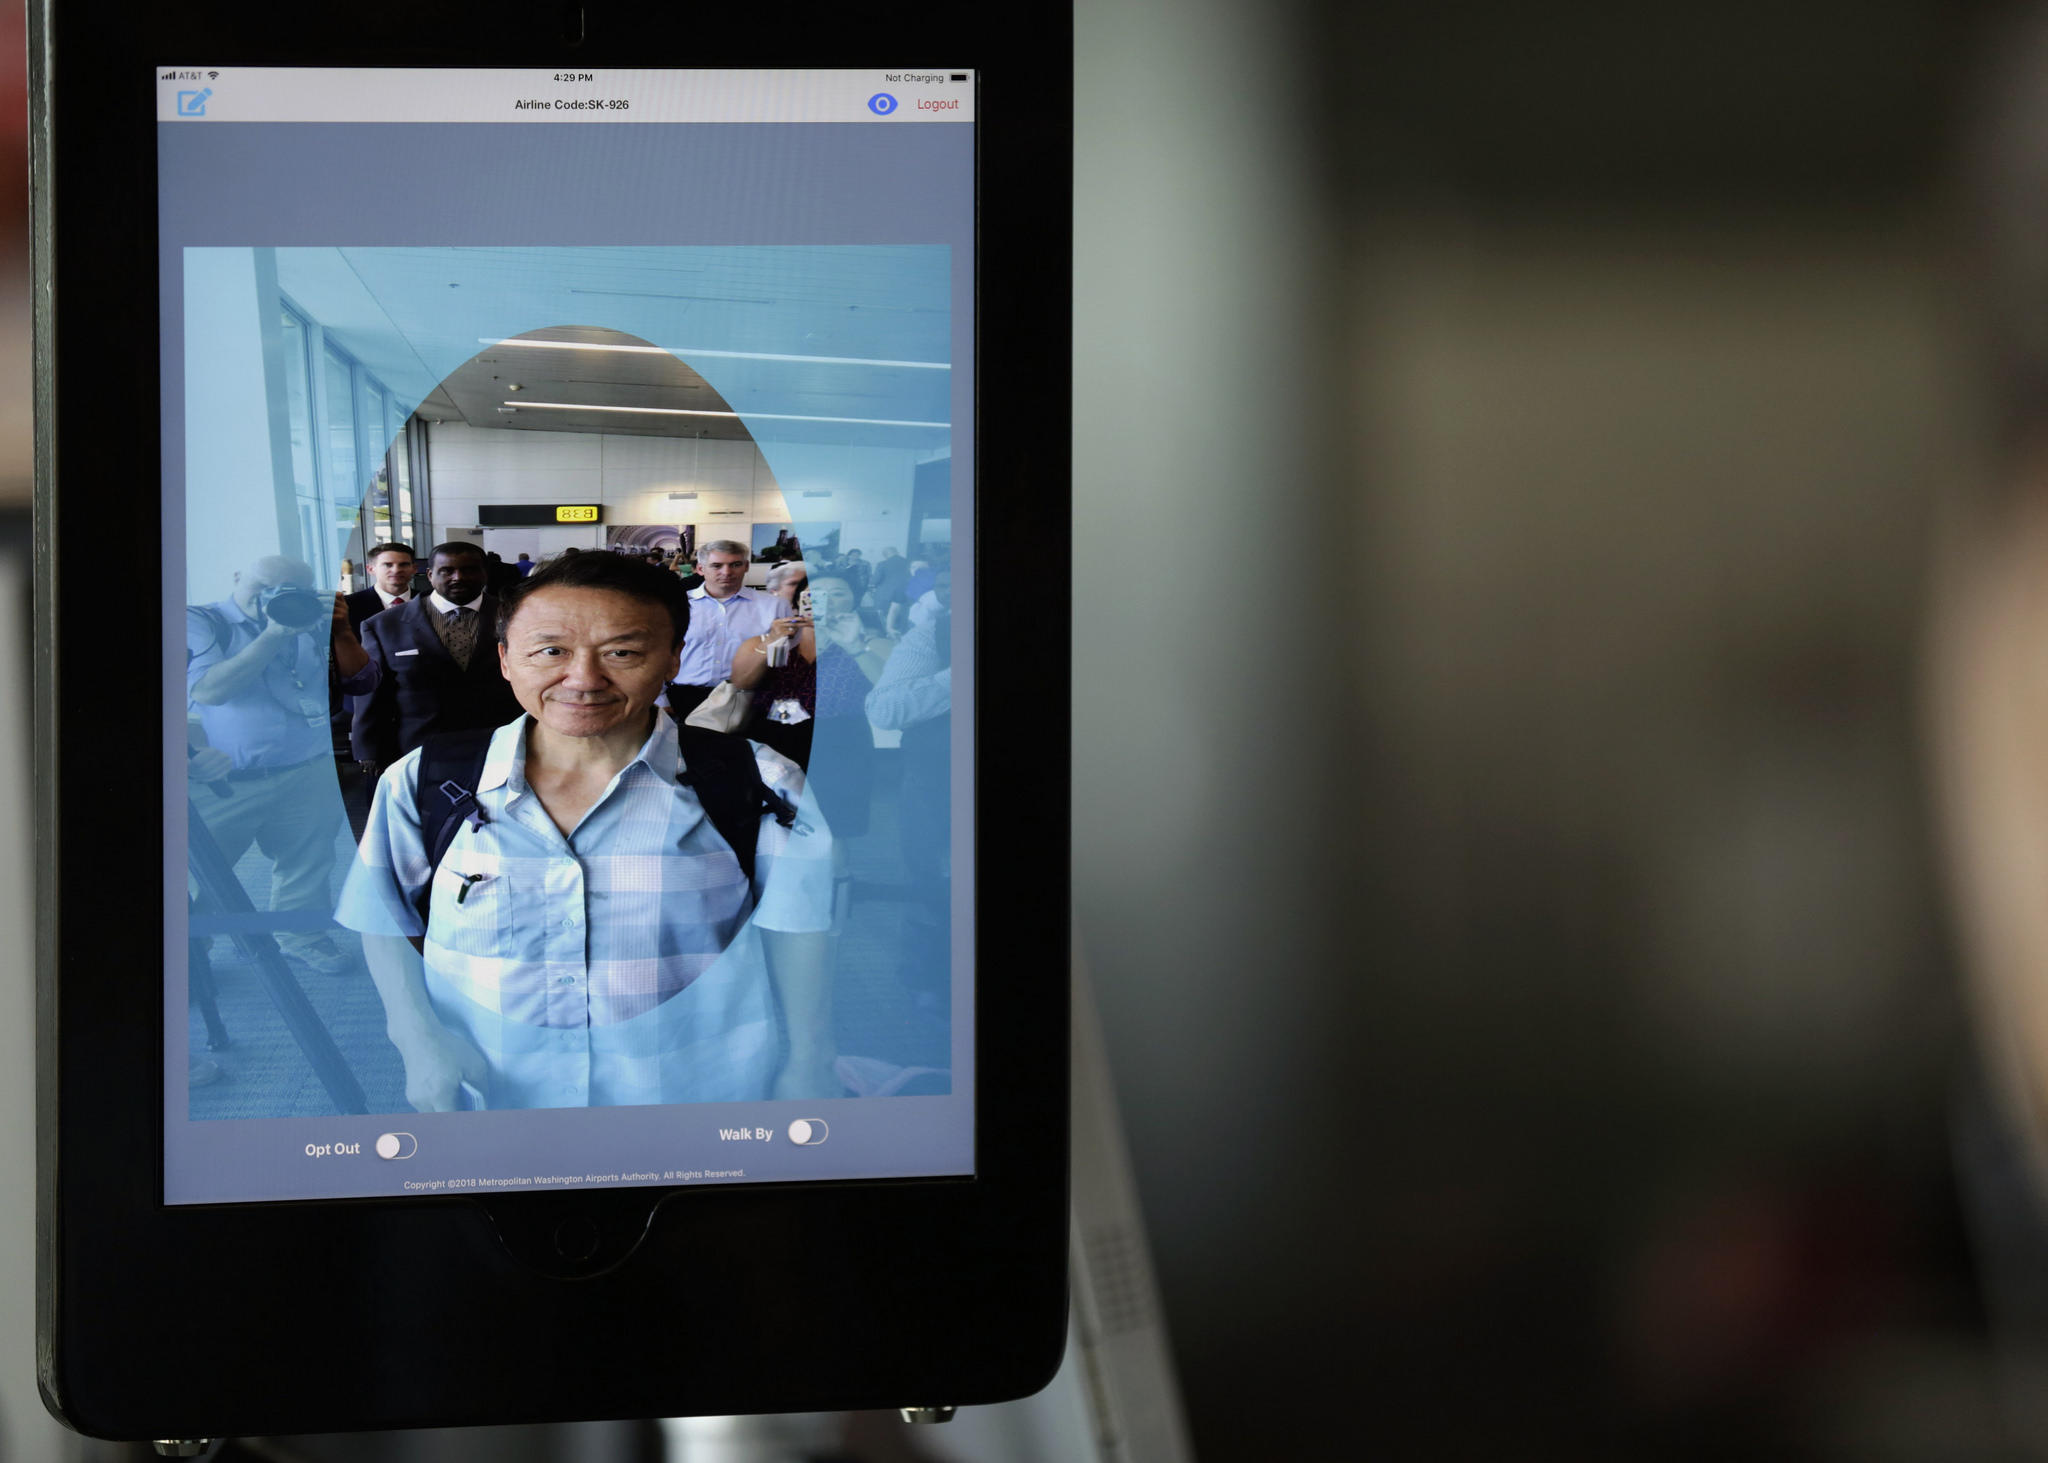 The Ministry of Infrastructure wants to implement a new technology for the boarding process in Brazil's airports. The project, called 'Embarque Seguro' (Safe Boarding), enables the use of facial recognition technology to conduct the procedure.